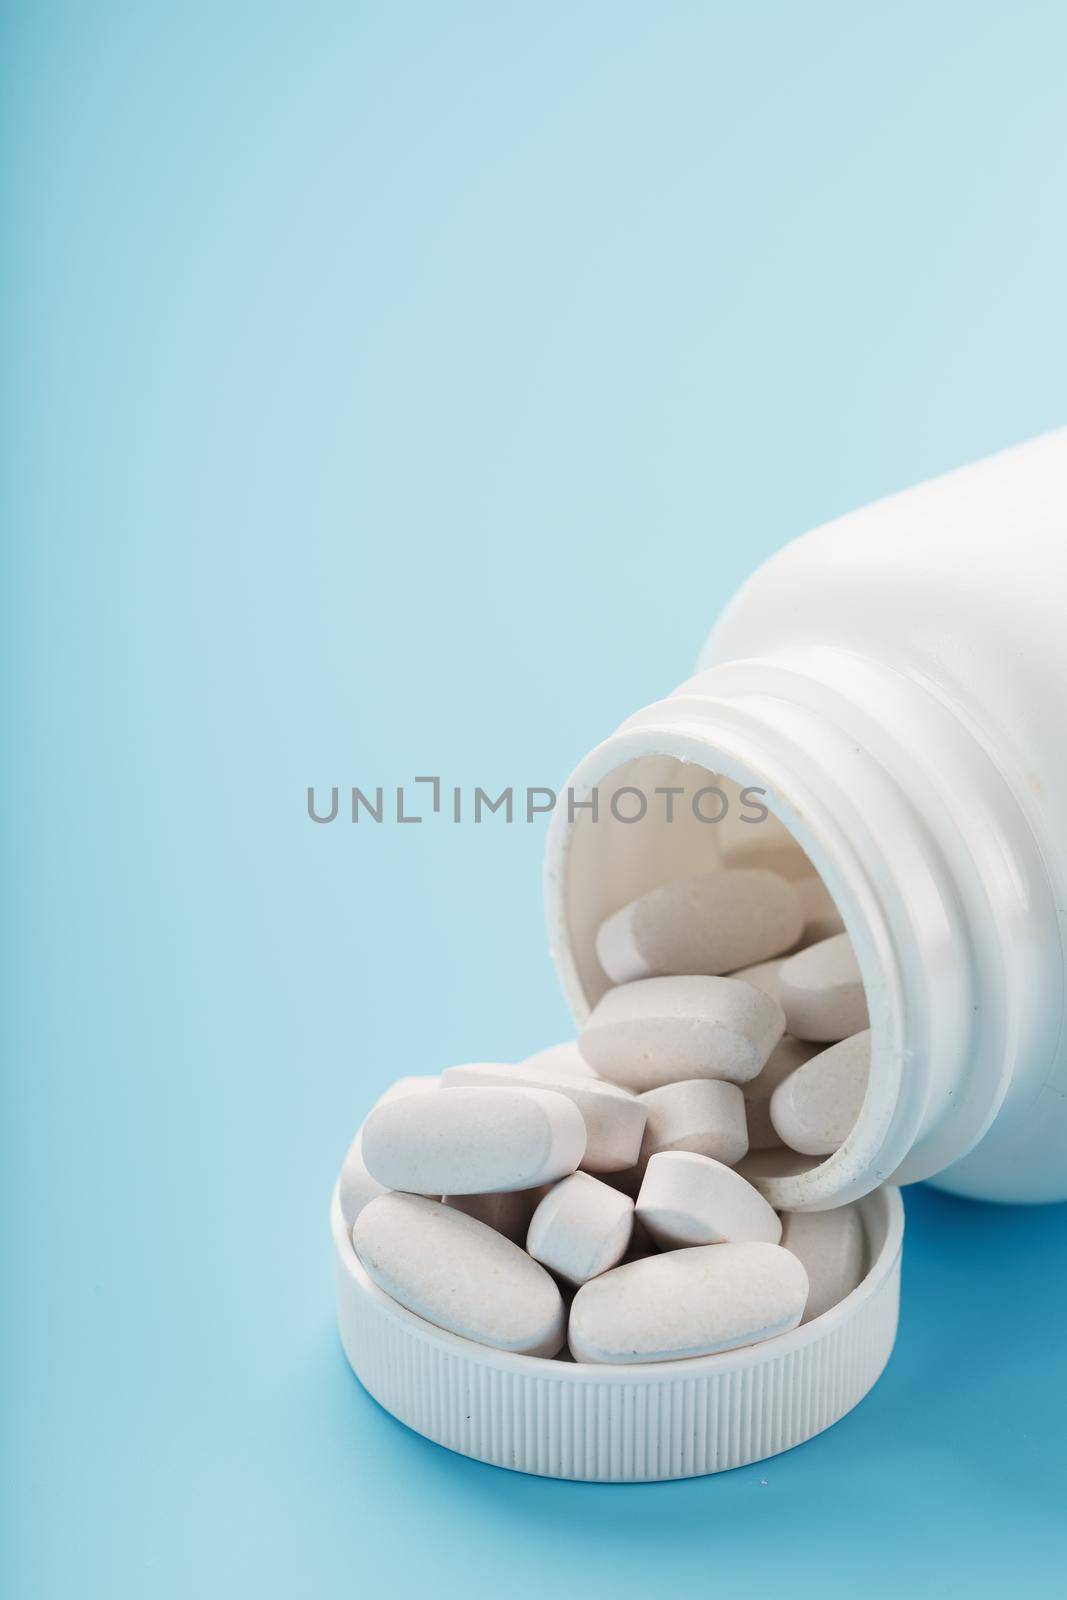 Vitamins and minerals in white capsules fell out of a white jar on a blue background. The concept of immune protection, antiviral prevention. Food additives. Free space